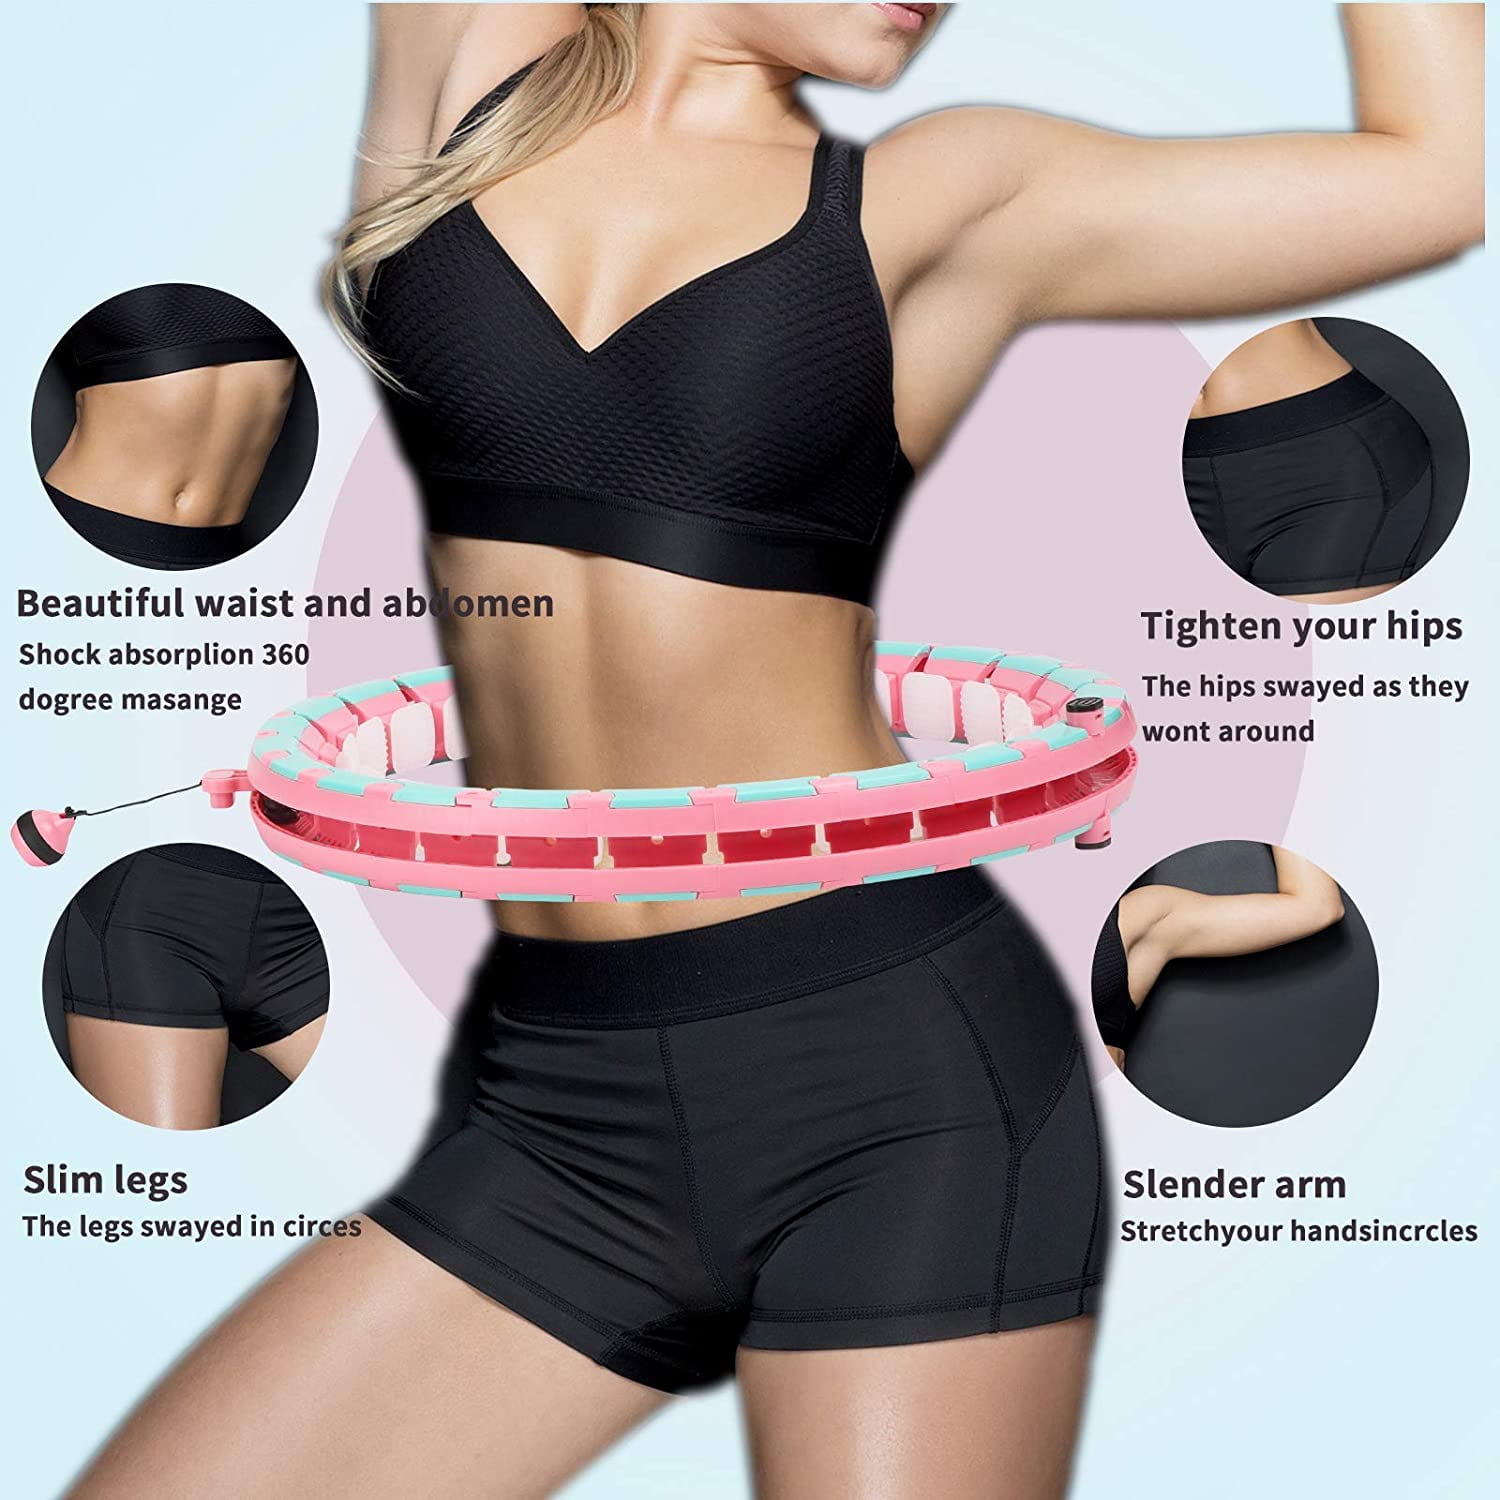 2 in 1 Abdomen Fitness Weight Loss for Kids Adults Abdomen Fitness Hoola Hoop ，Weight Loss Massage Hoops,24 Detachable Knots Adjustable Weight YUKU 360 Degree Massage 